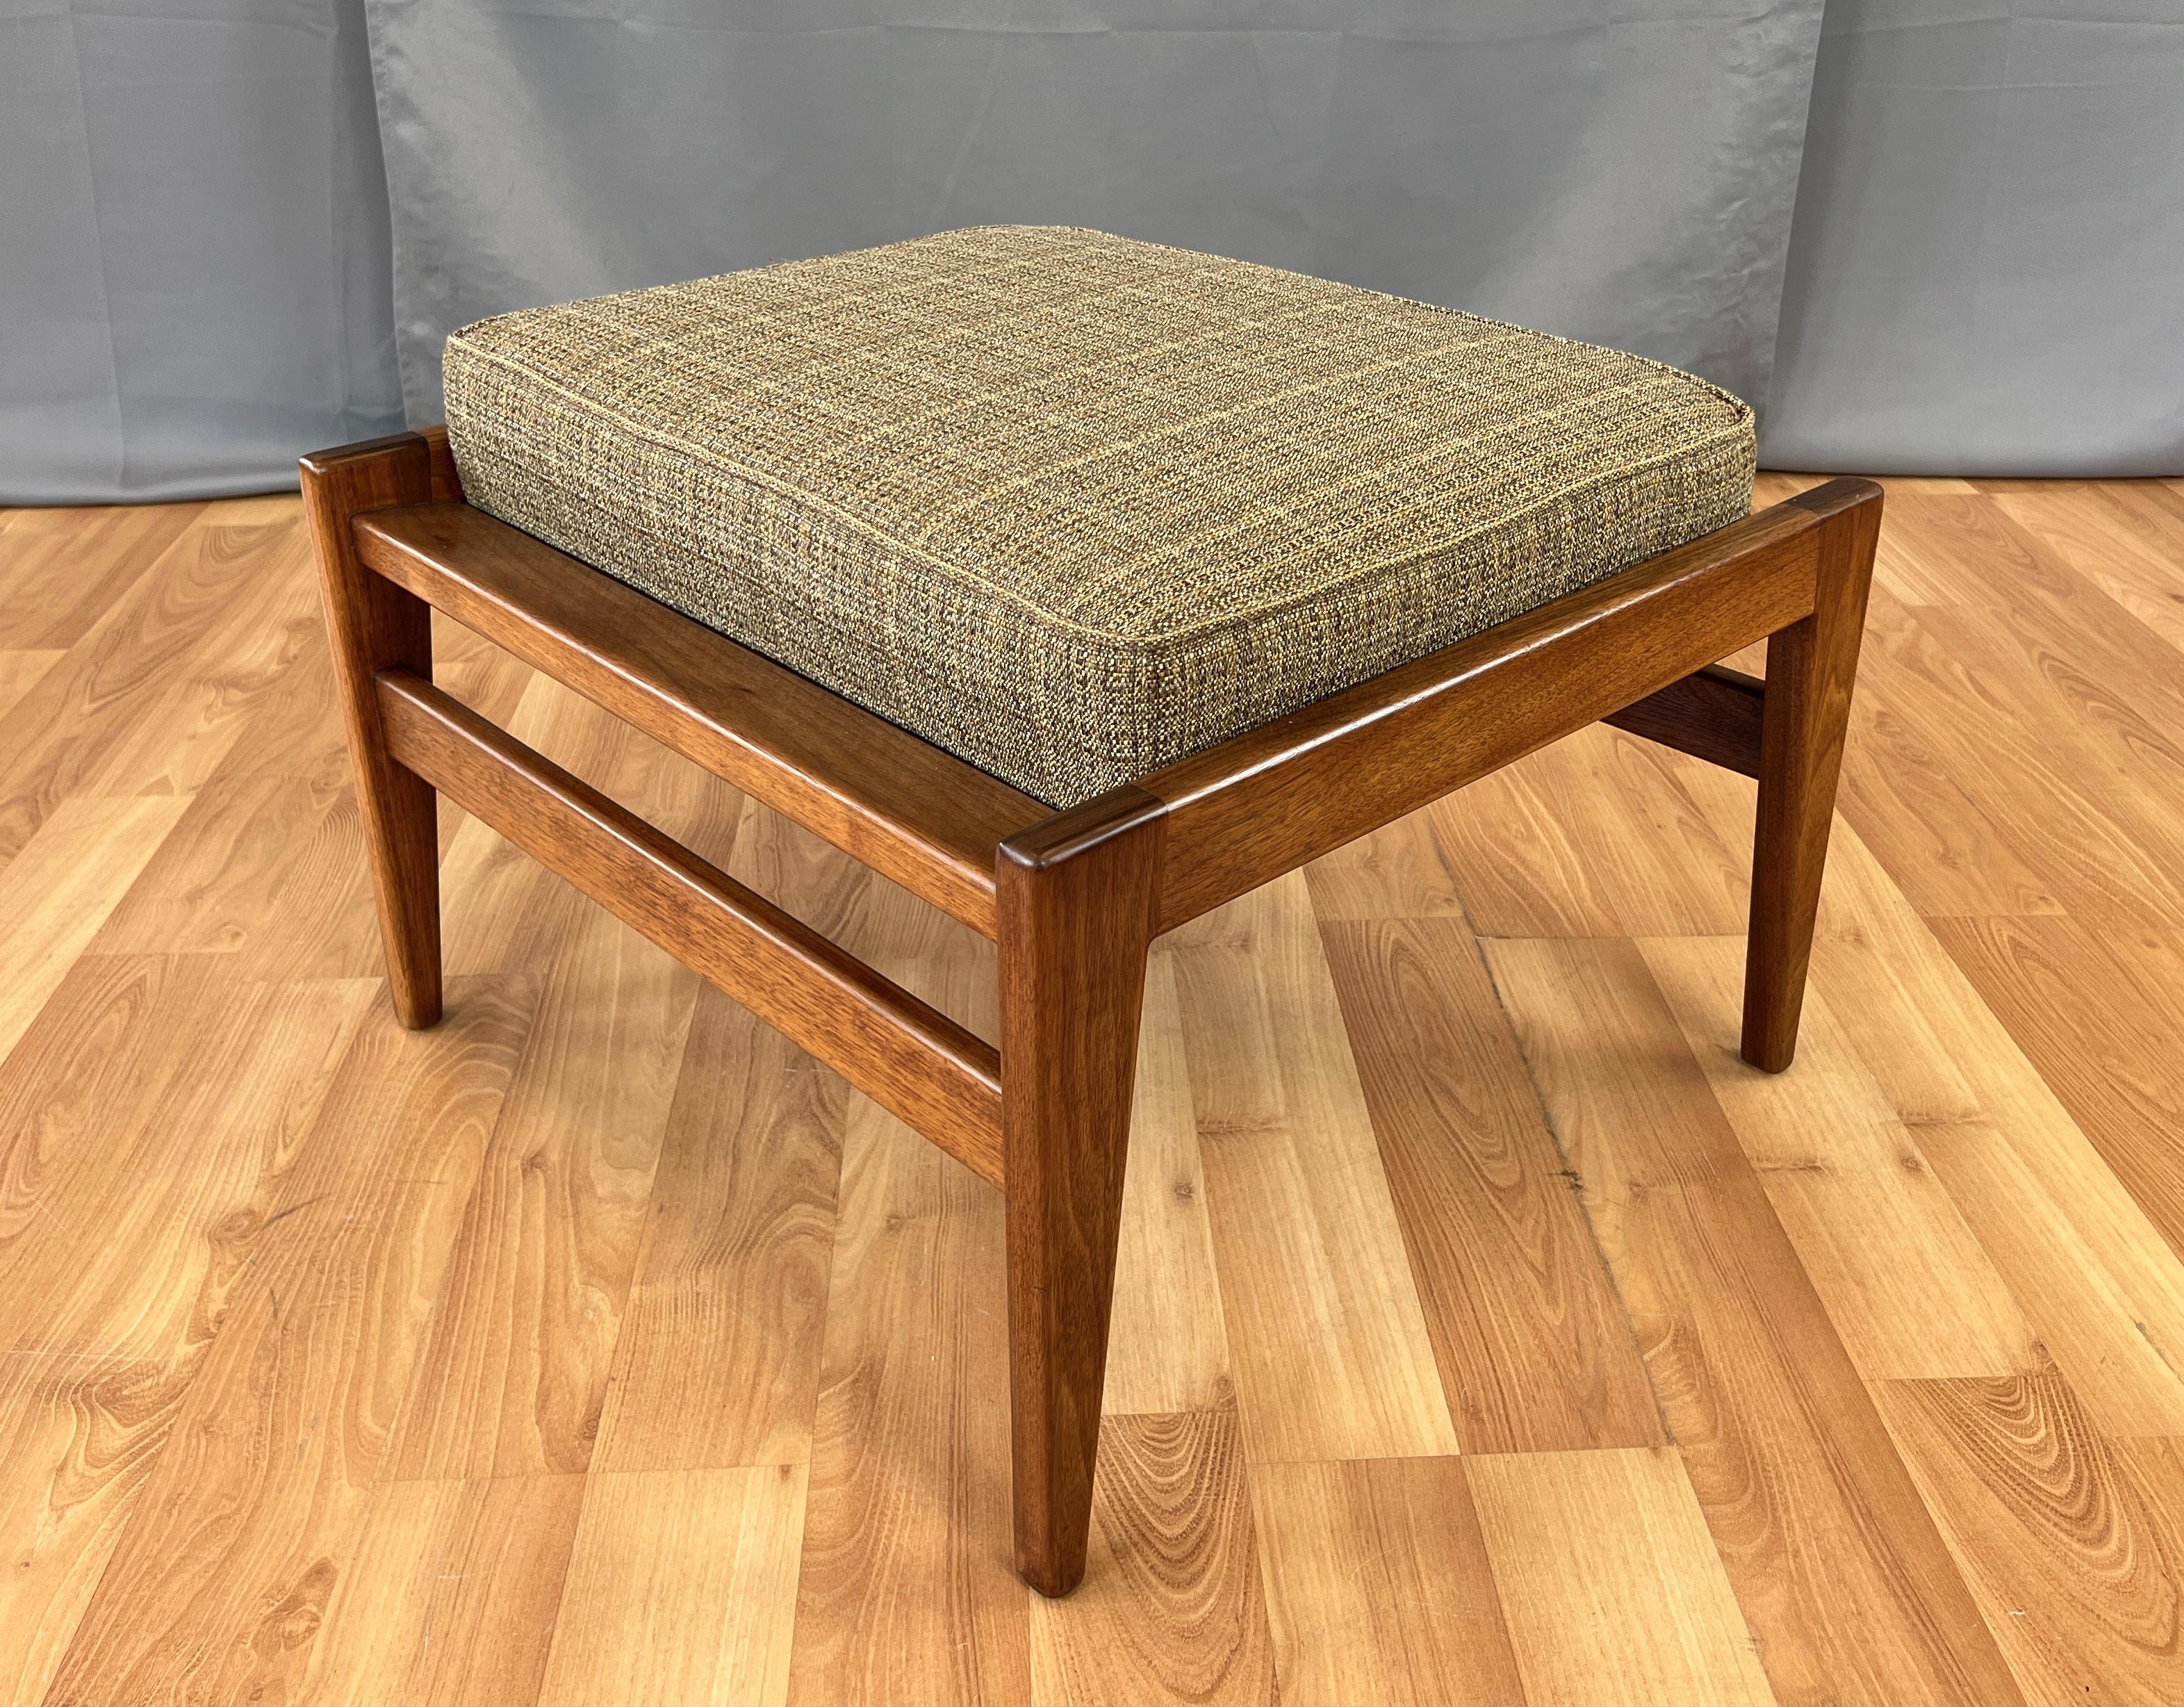 Offered here is a Jens Risom designed Walnut ottoman (signed under upholstery), angular framework and in the center sits the cushion that's built into the frame.
Ottoman has an edge on two side, which is a nice design touch, fabric feels to be a